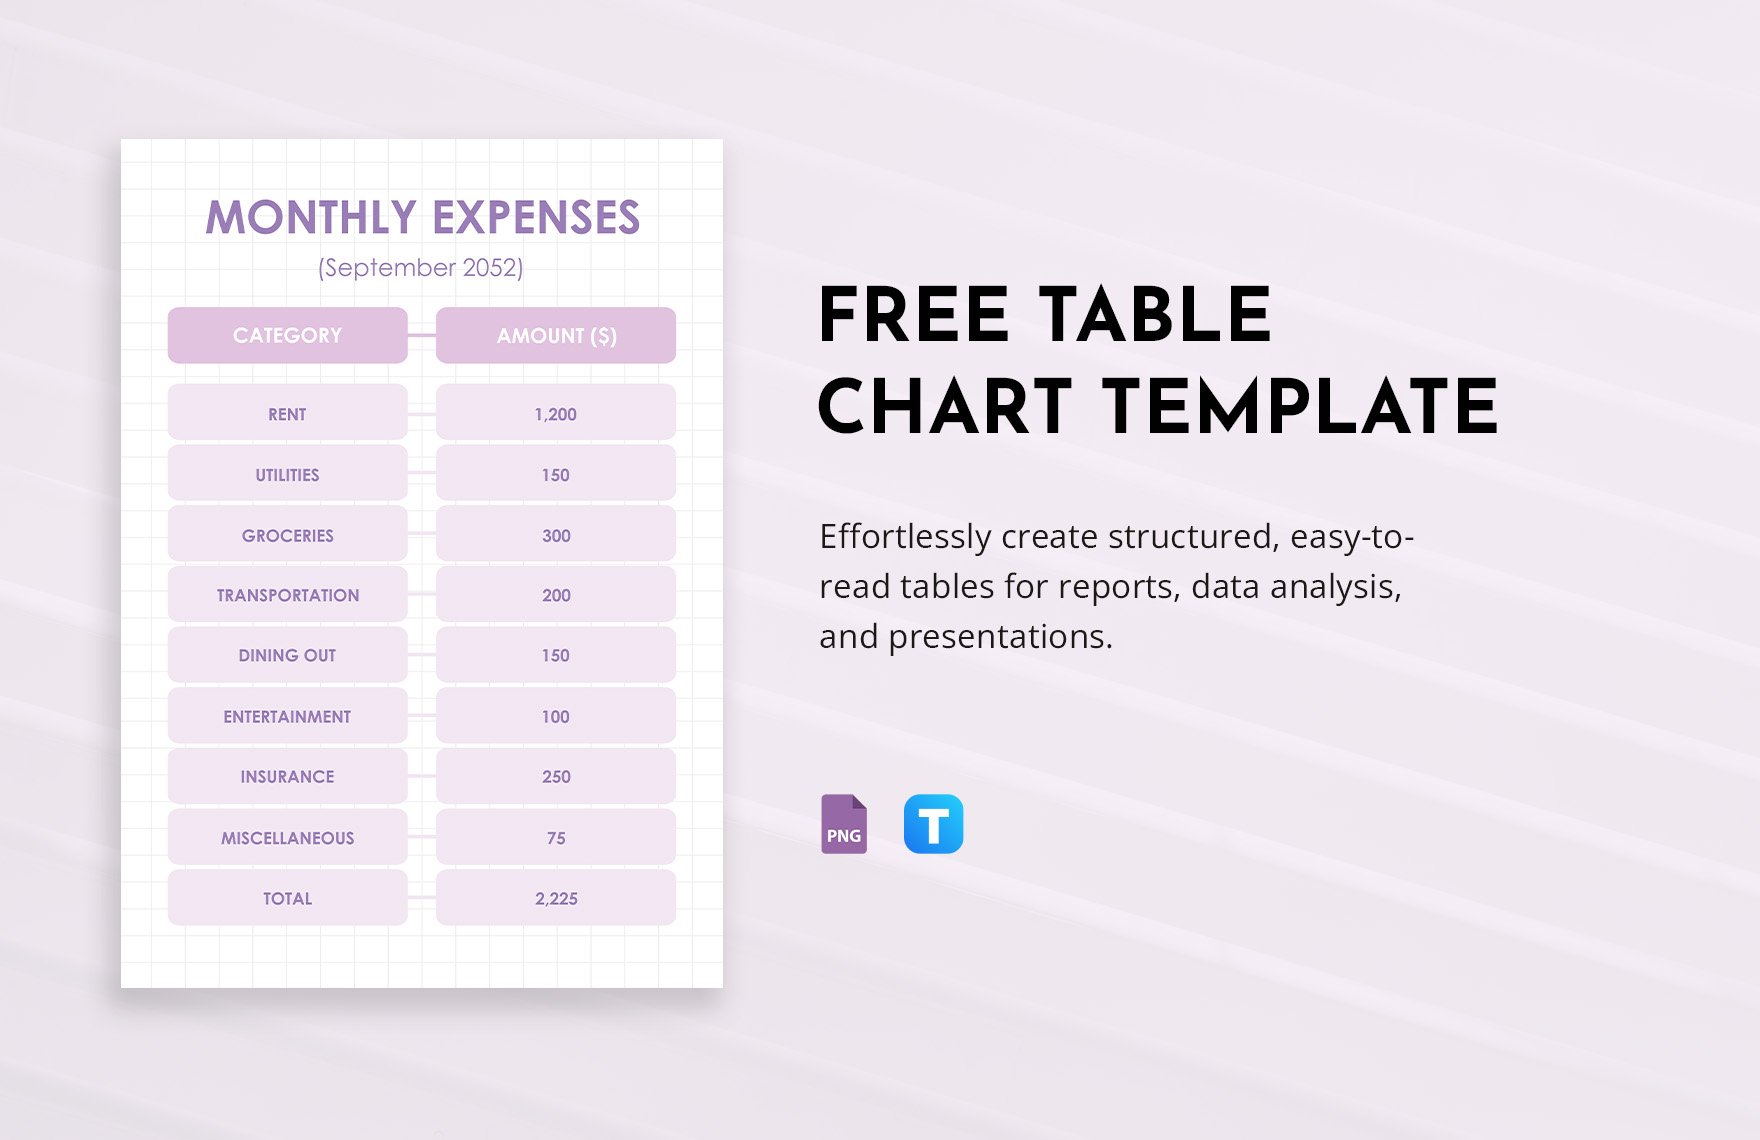 Free Table Chart Template